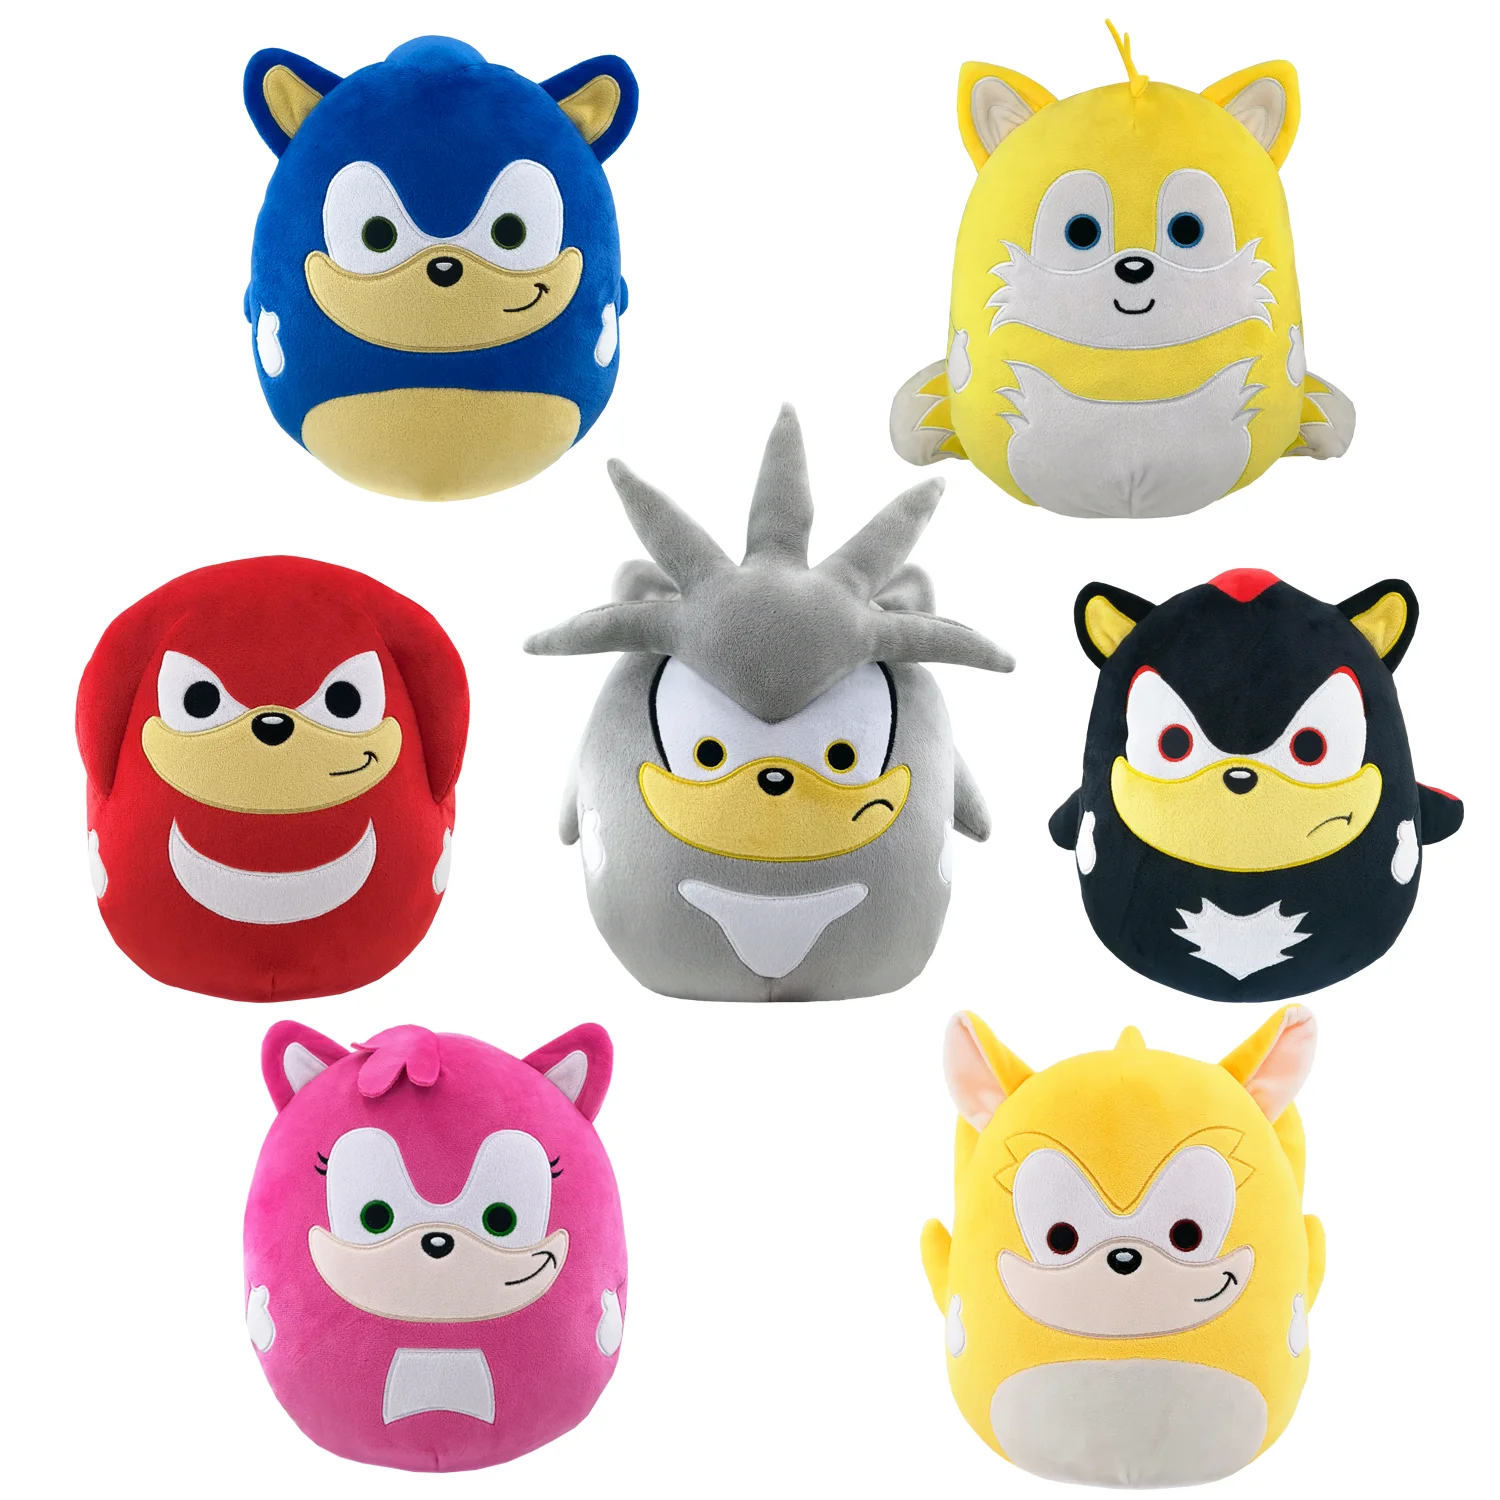 

Sonic The Hedgehog Characters Plush Figure Toy Doll Stuffed Anime Pillow Cartoon Theme Party Favor Girl kid gifts Birthday Decor